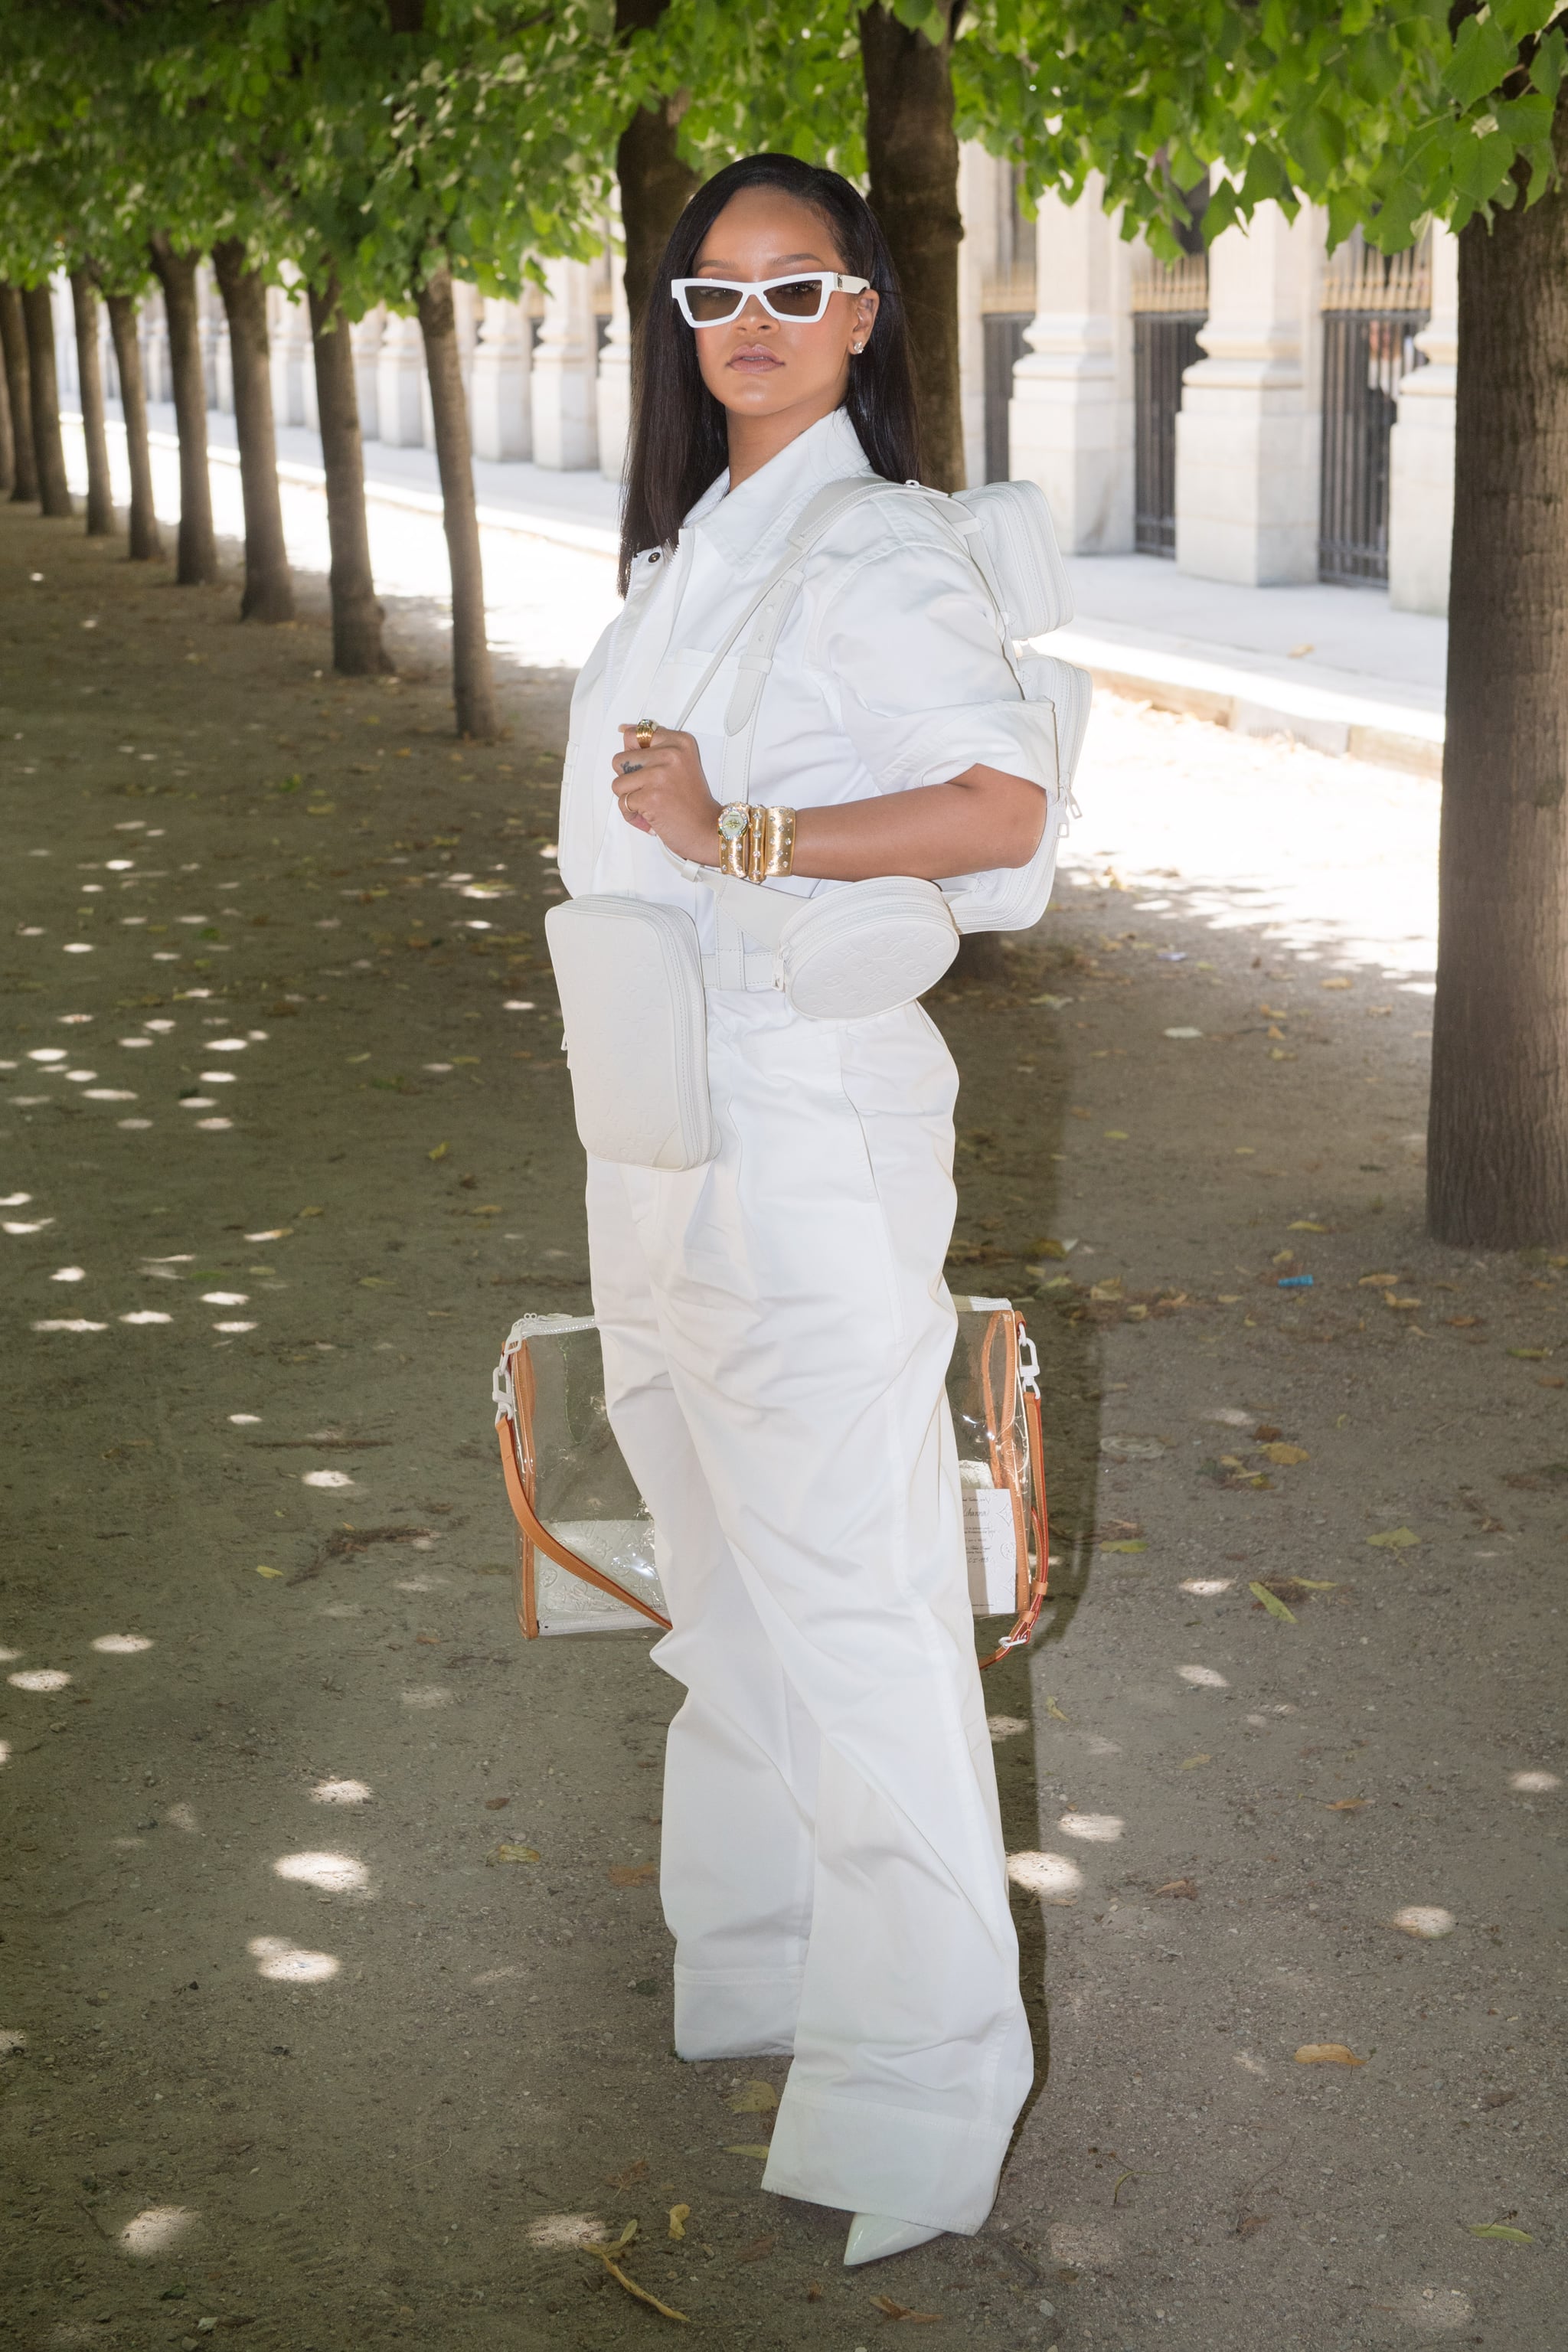 Essence - Rihanna was rocking all-white and looking heavenly at the Louis  Vuitton Menswear Spring/Summer 2019 show in Paris.